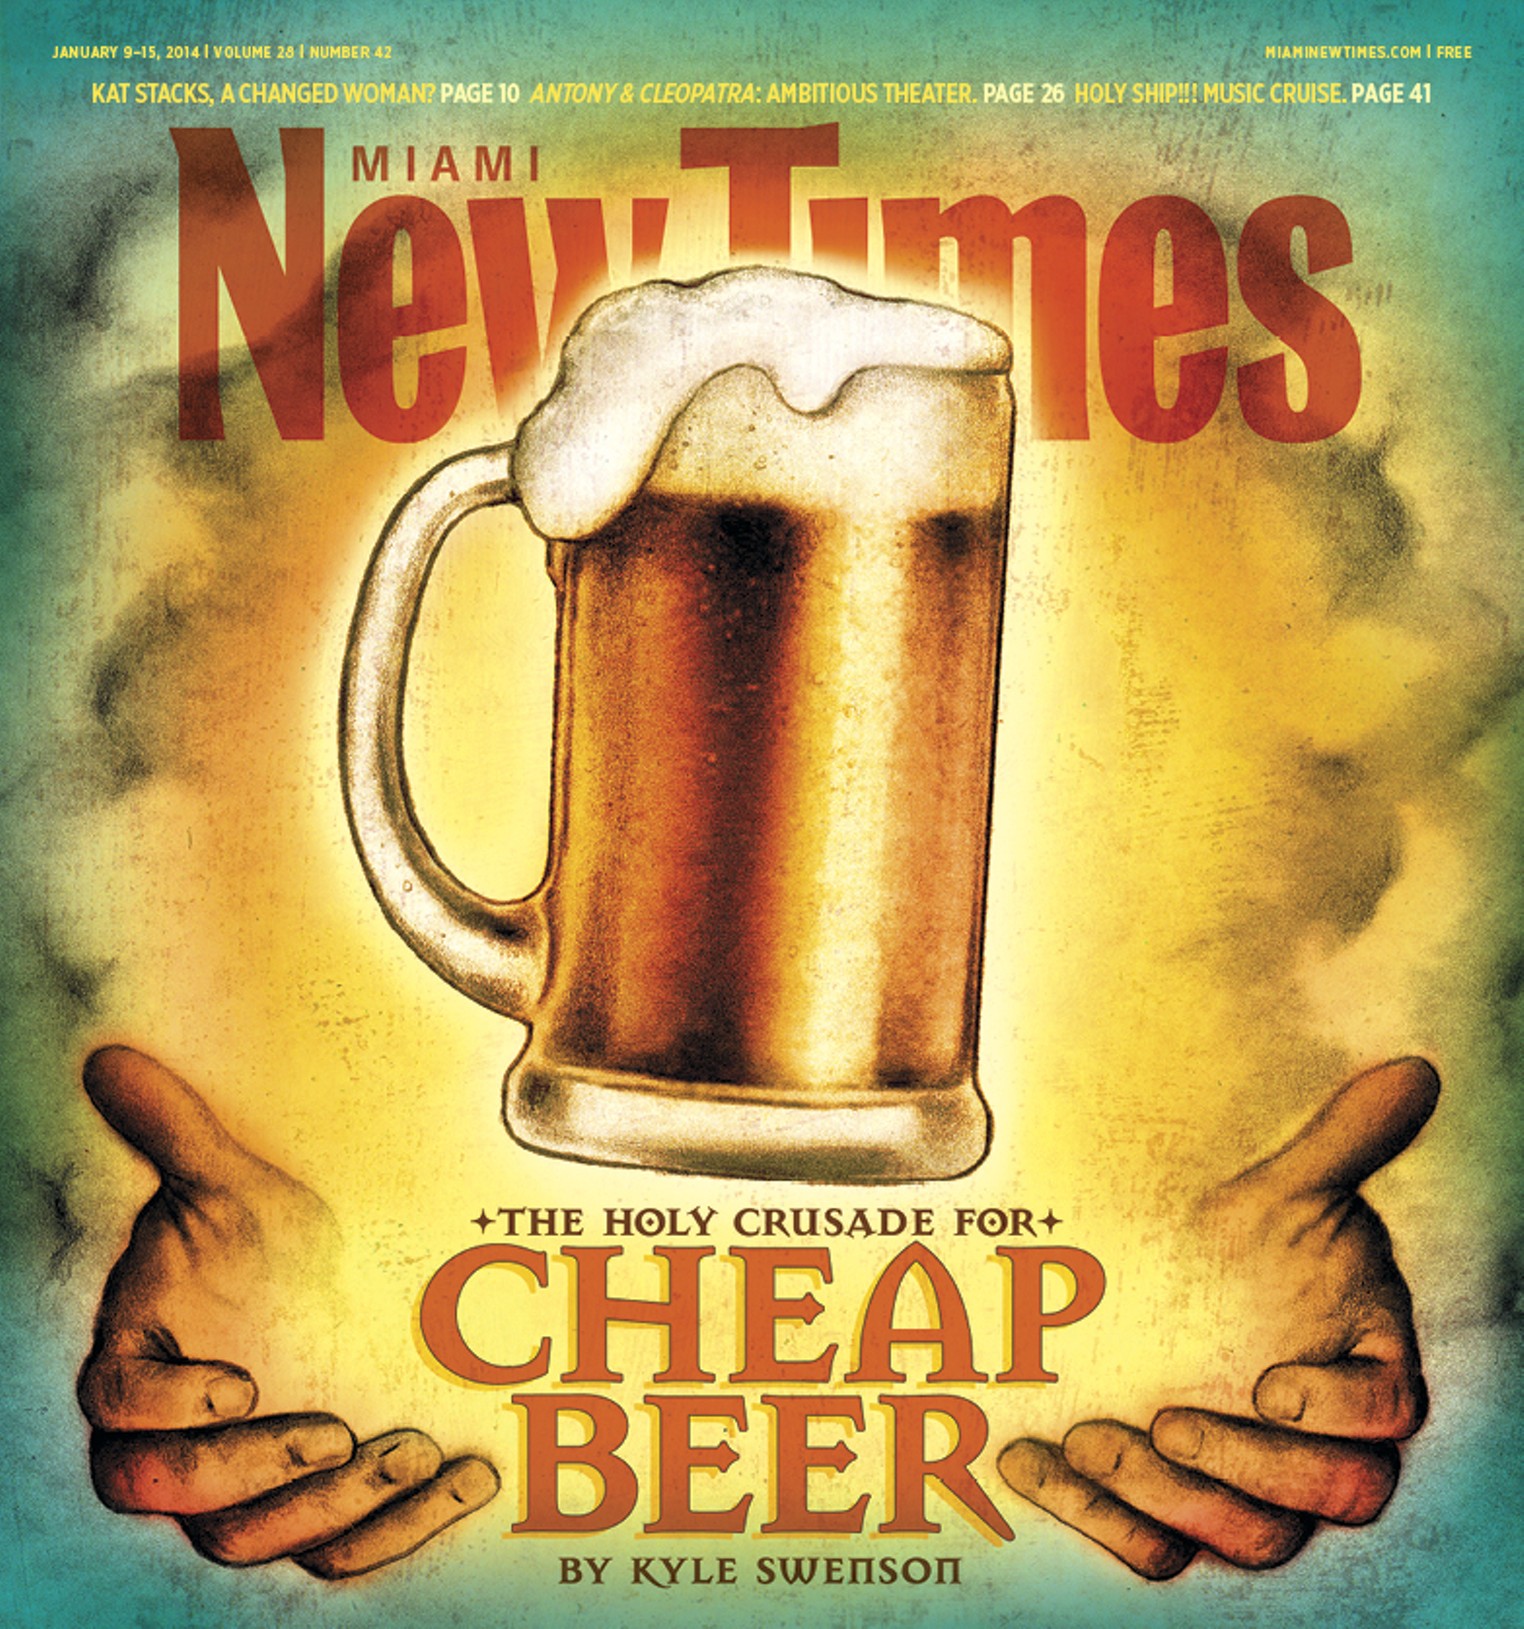 The Best Miami New Times Covers of 2014 Miami Miami New Times The